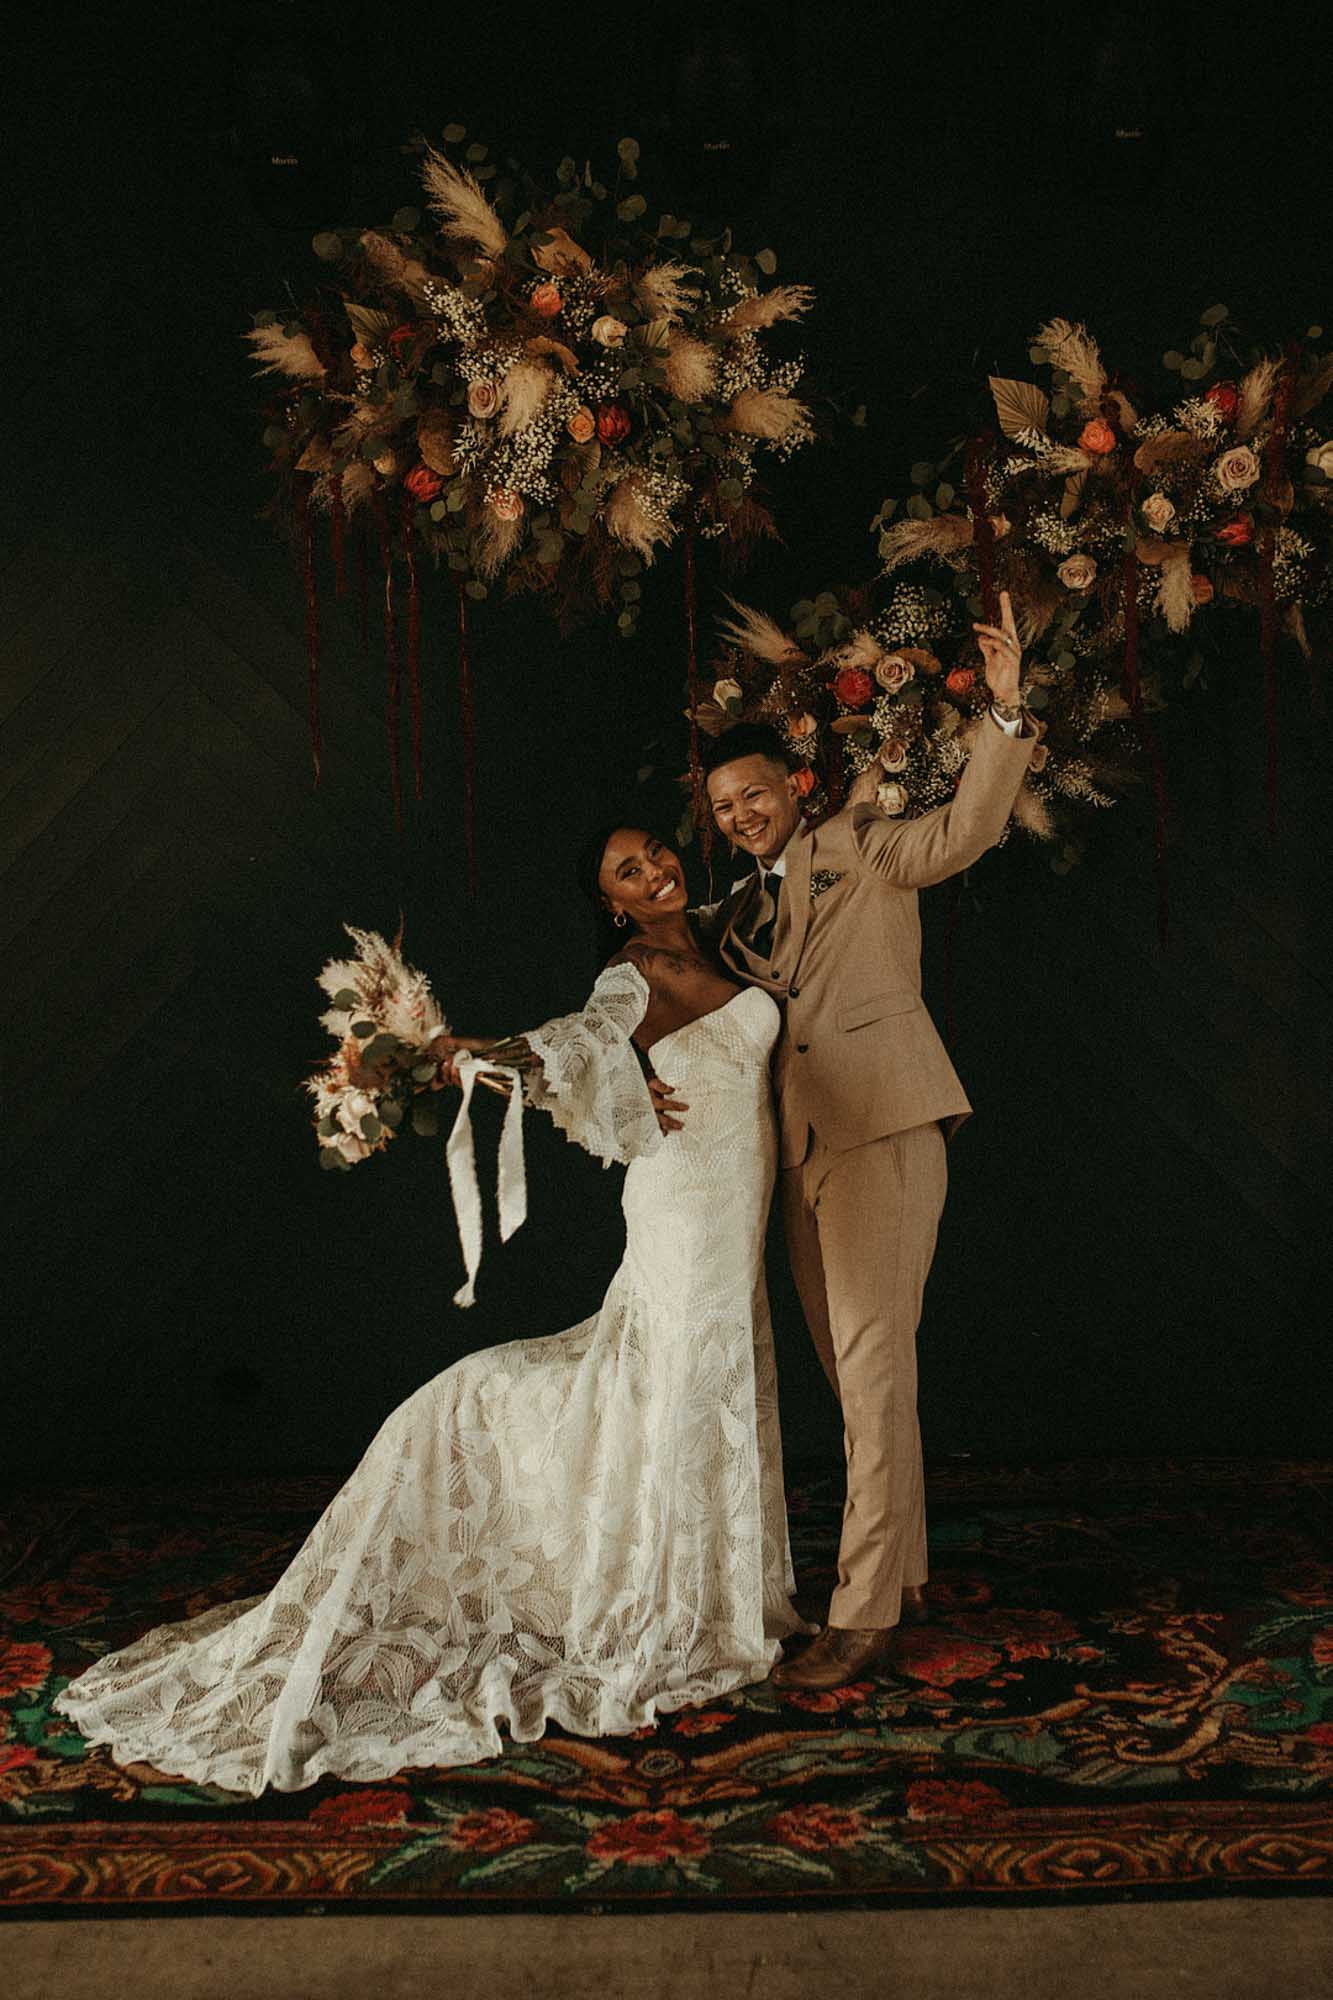 Elegant Colorado vow renewal with wild florals | McKenzie Bigliazzi Photography | Featured on Equally Wed, the leading LGBTQ+ wedding magazine